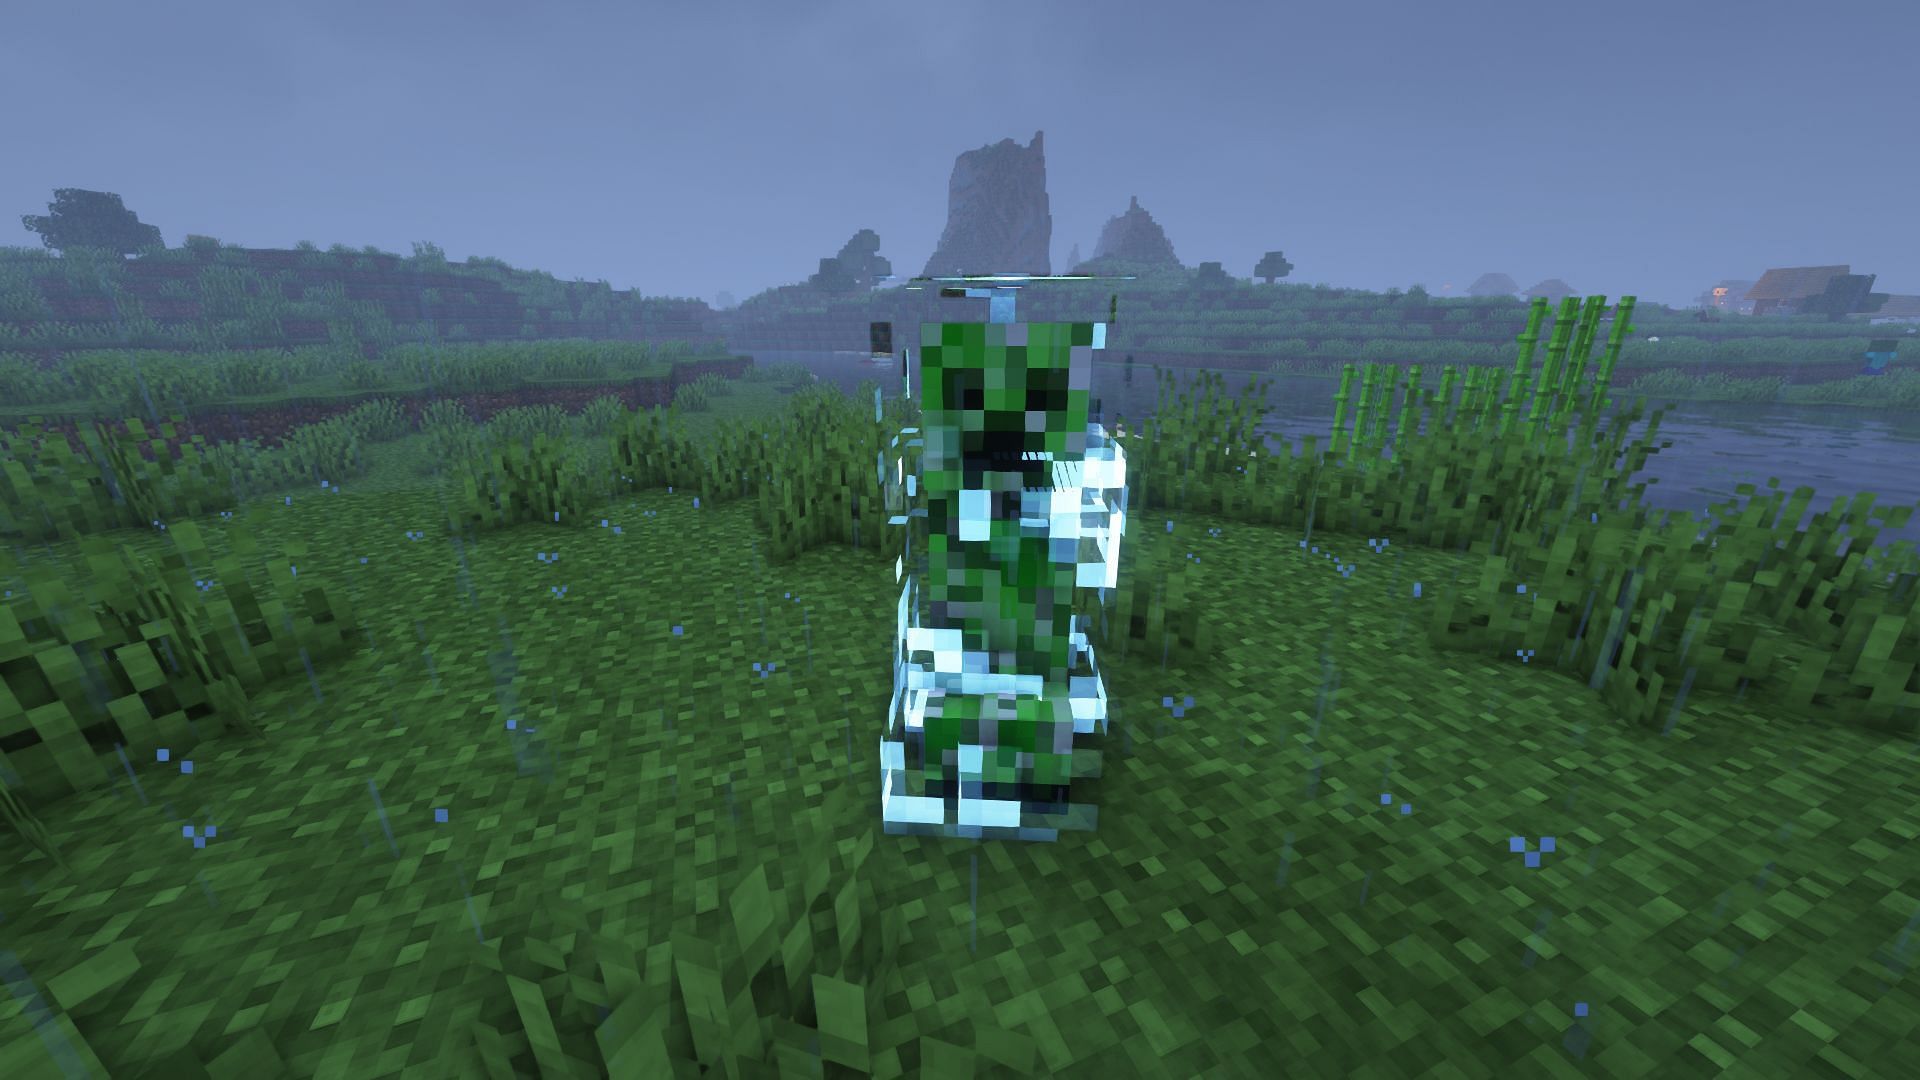 Charged Creepers have a much stronger explosion level compared to regular creeper in Minecraft (Image via Mojang)